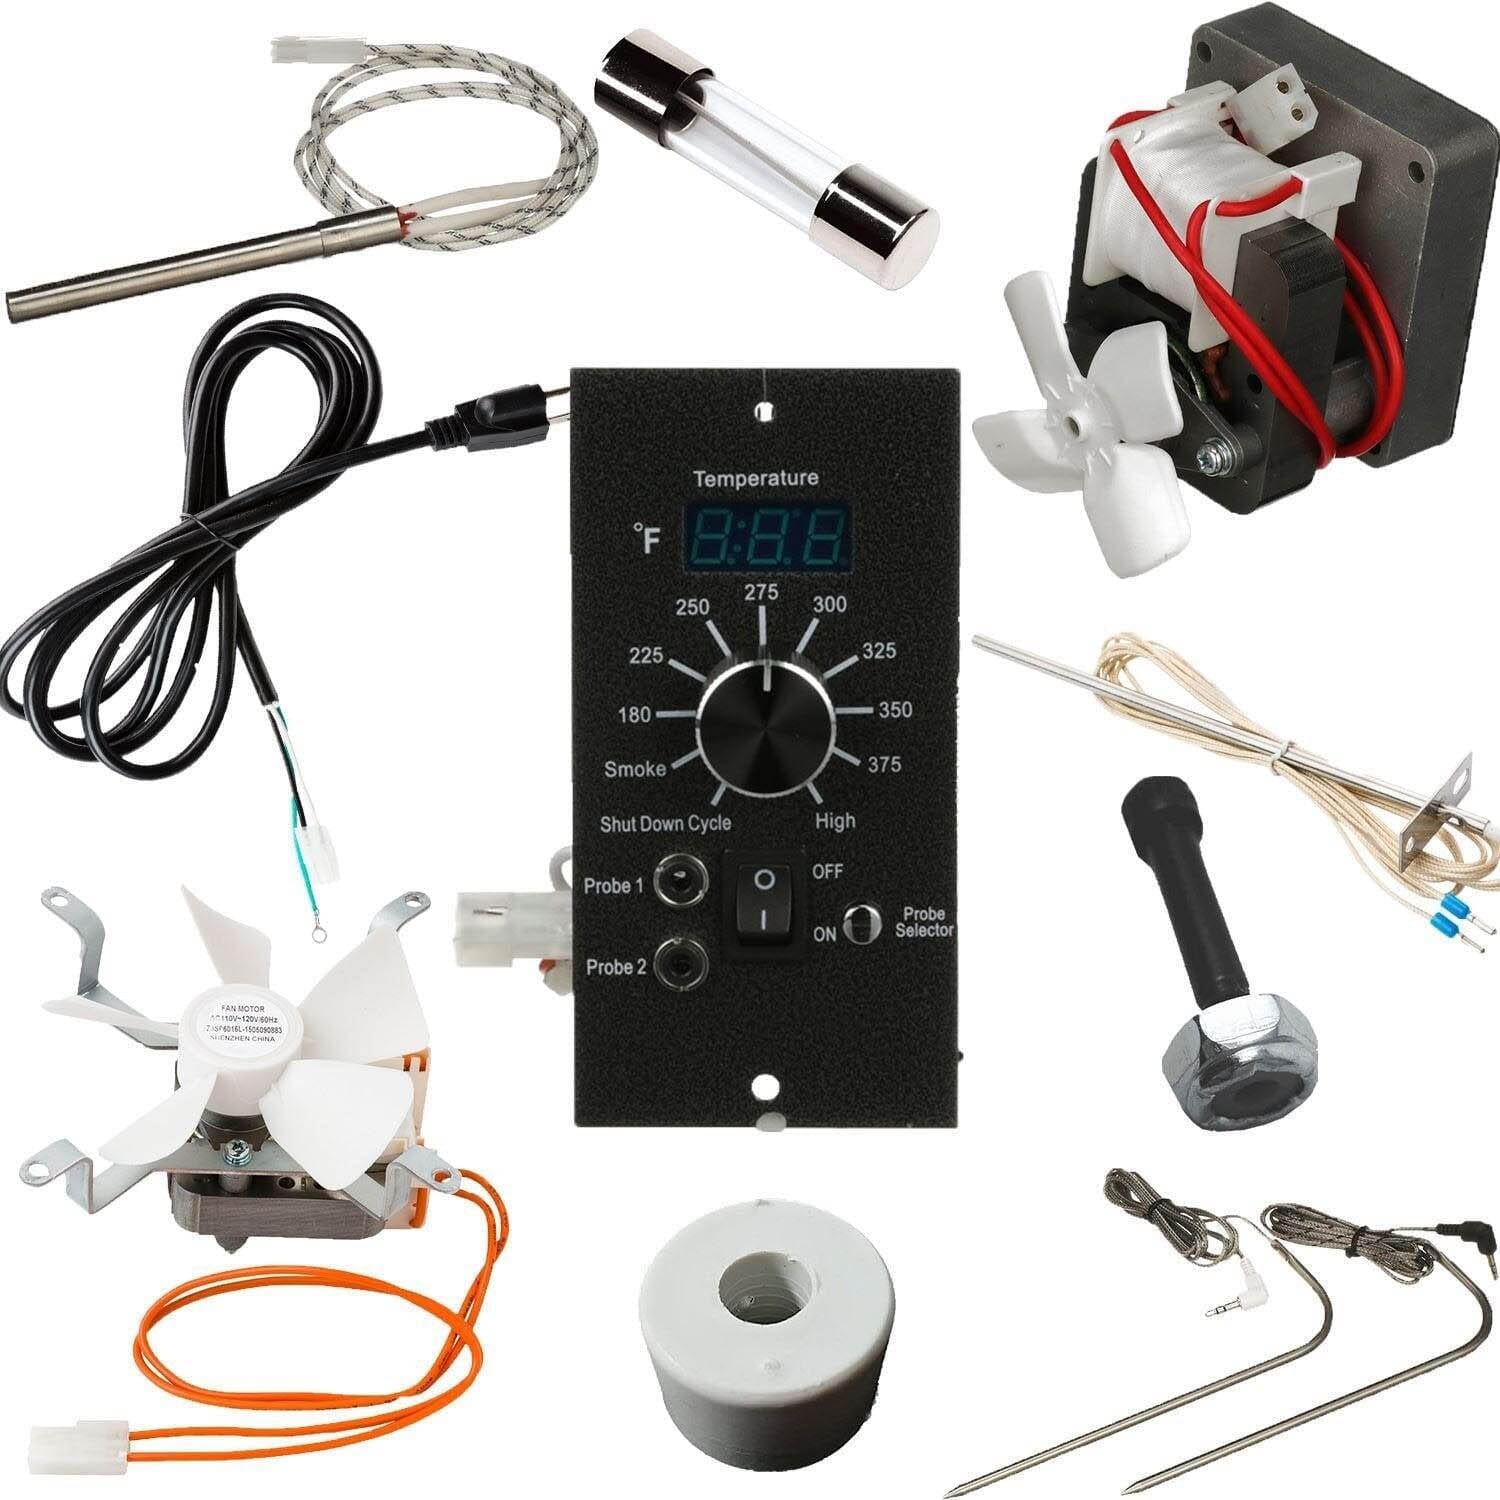 Pit Boss Digital Control Board For Grills & Smoker Pit Boss Pellet Grill  Parts For Less